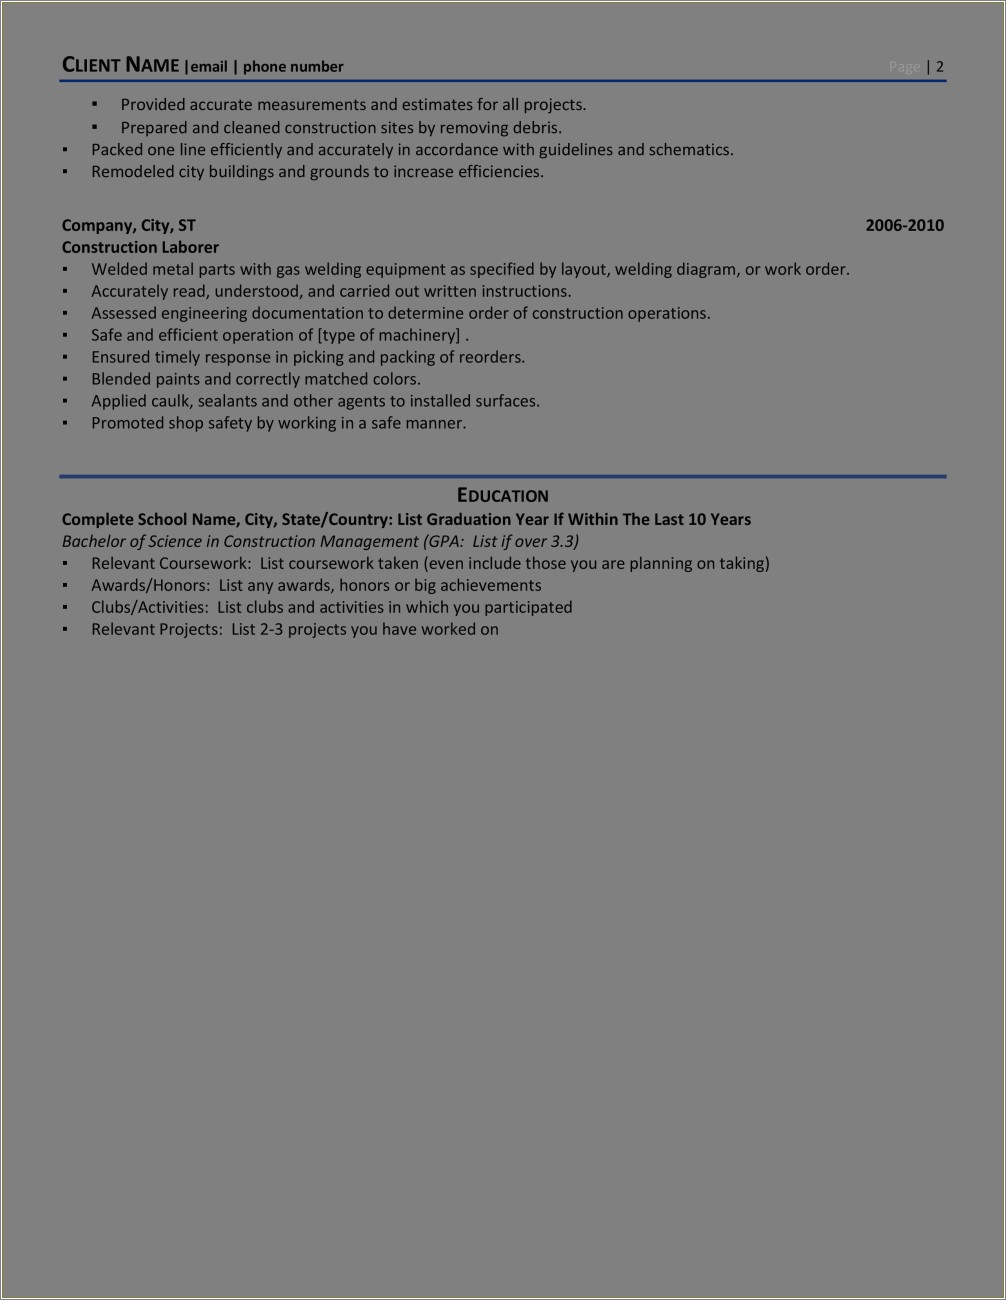 General Resume Objective Examples Foe Constrution